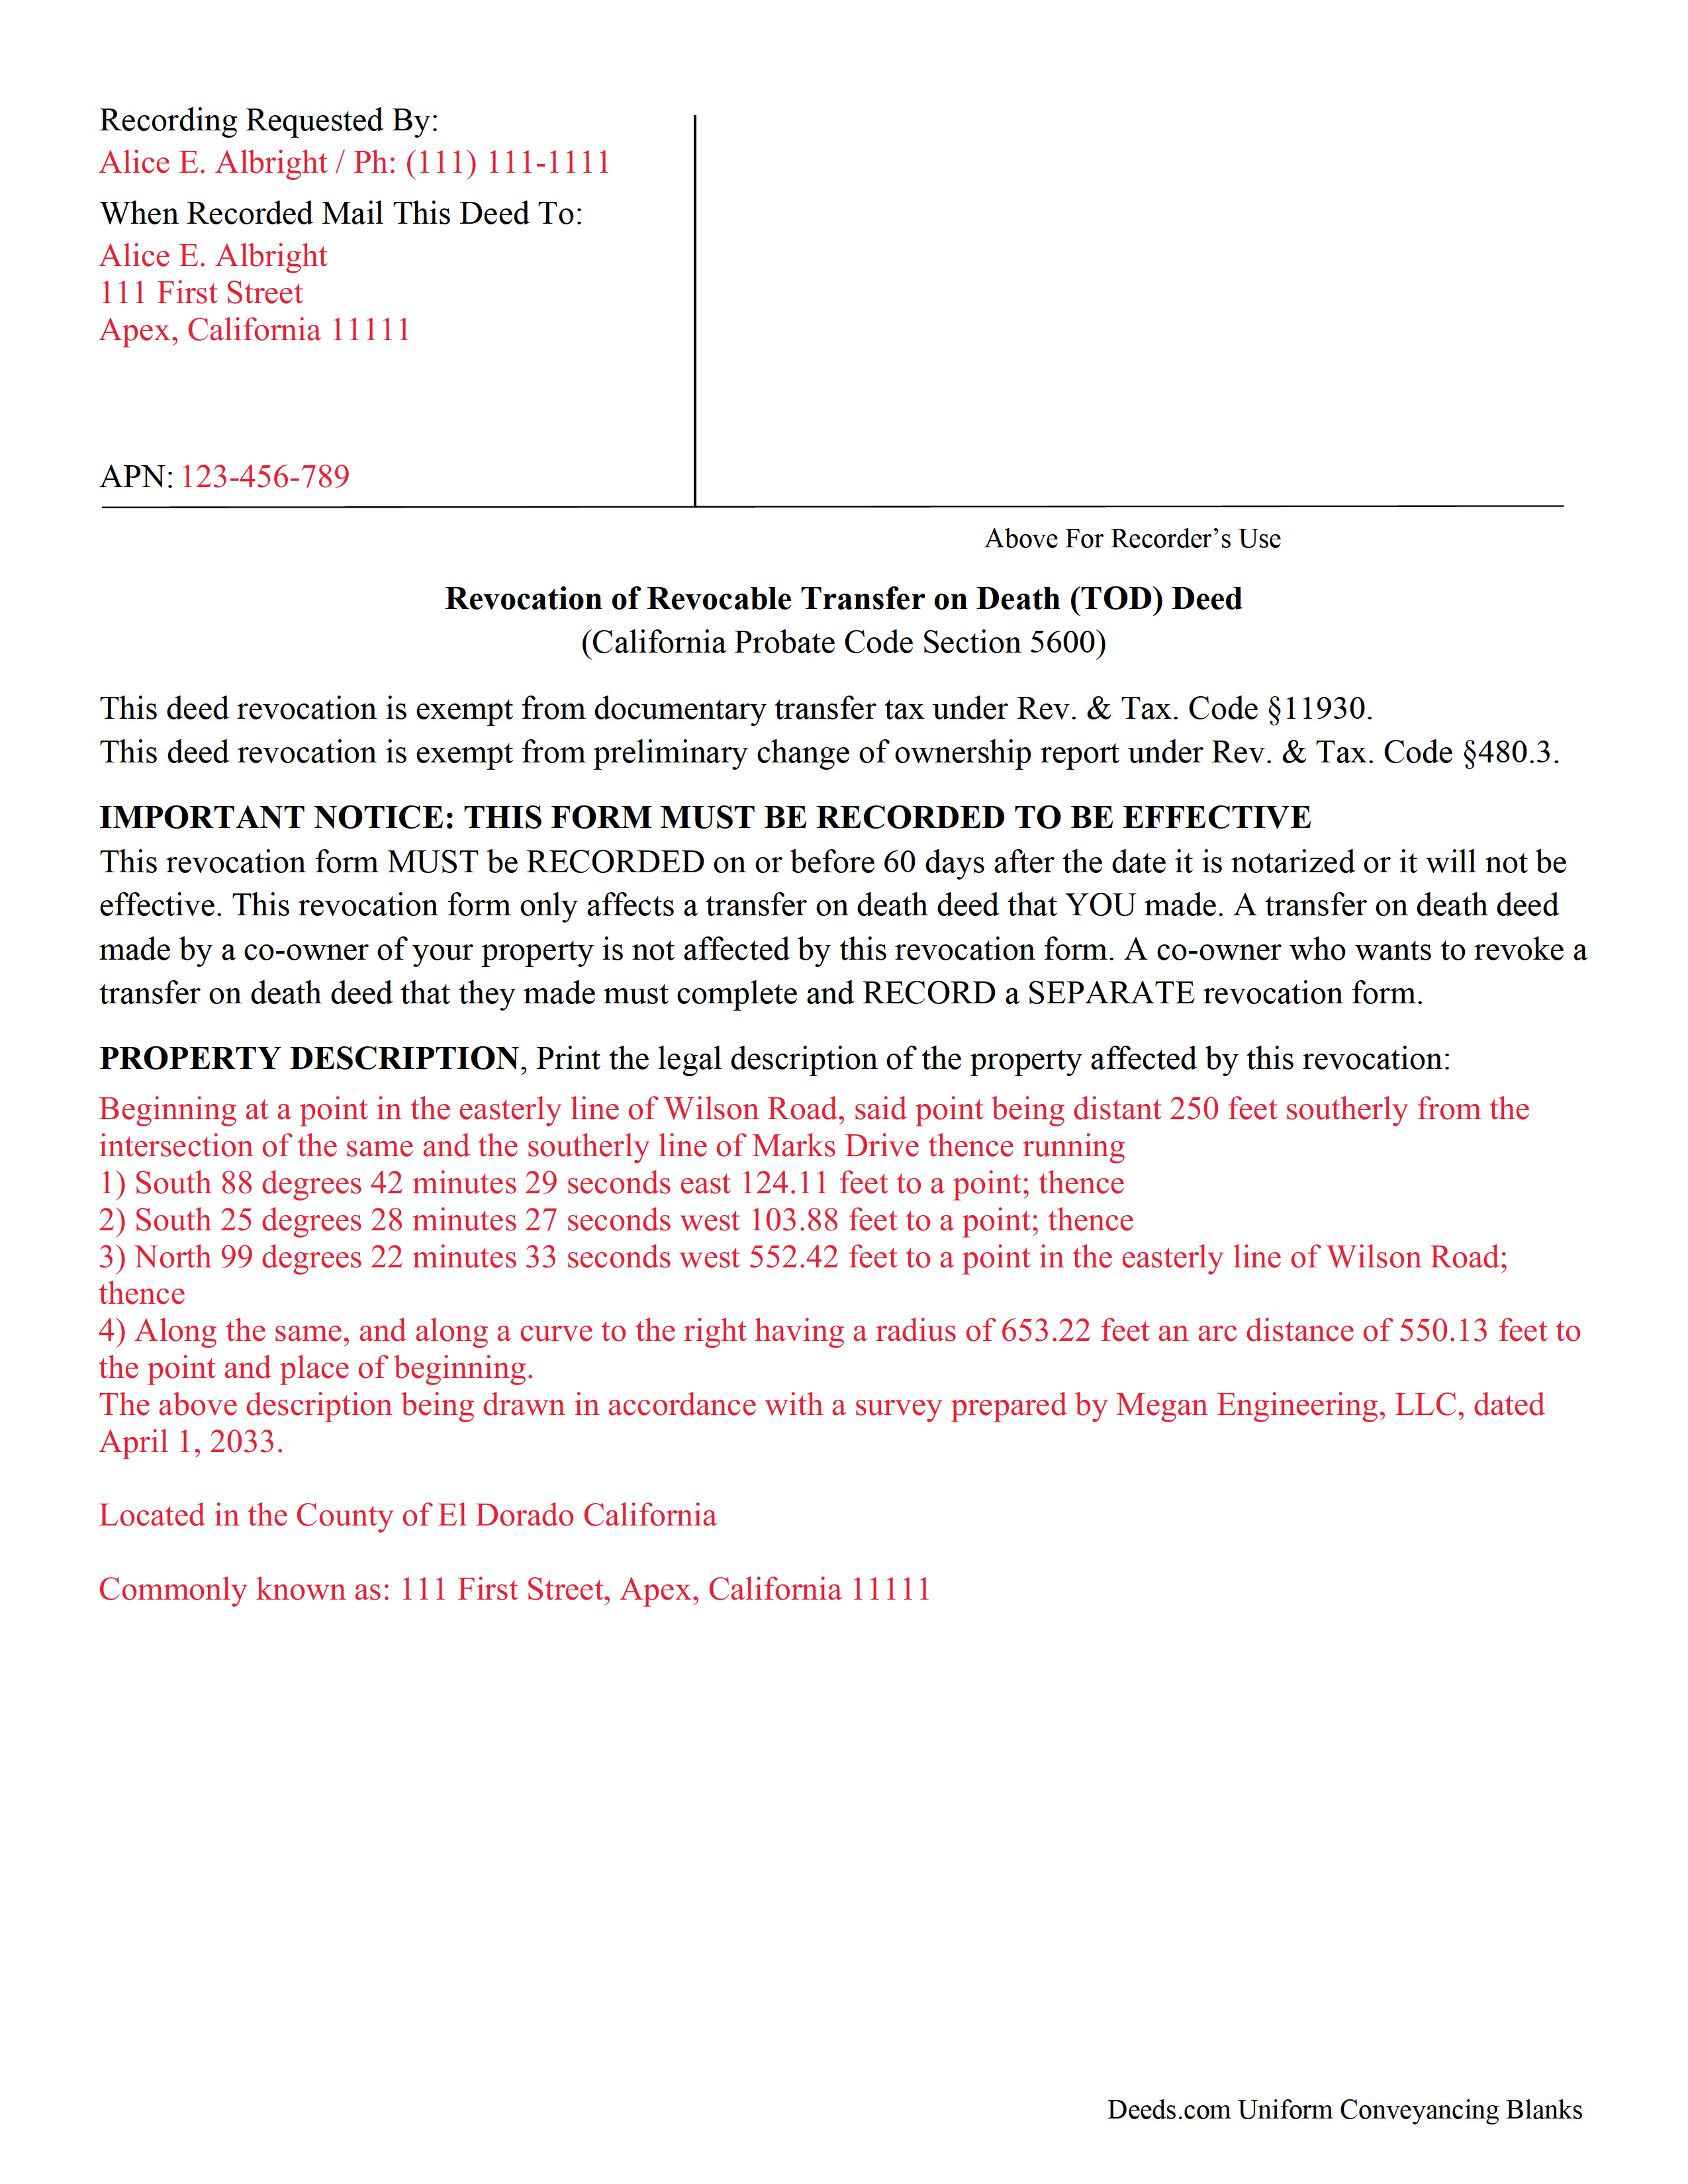 Completed Example of the Revocation of Transfer on Death Deed Document